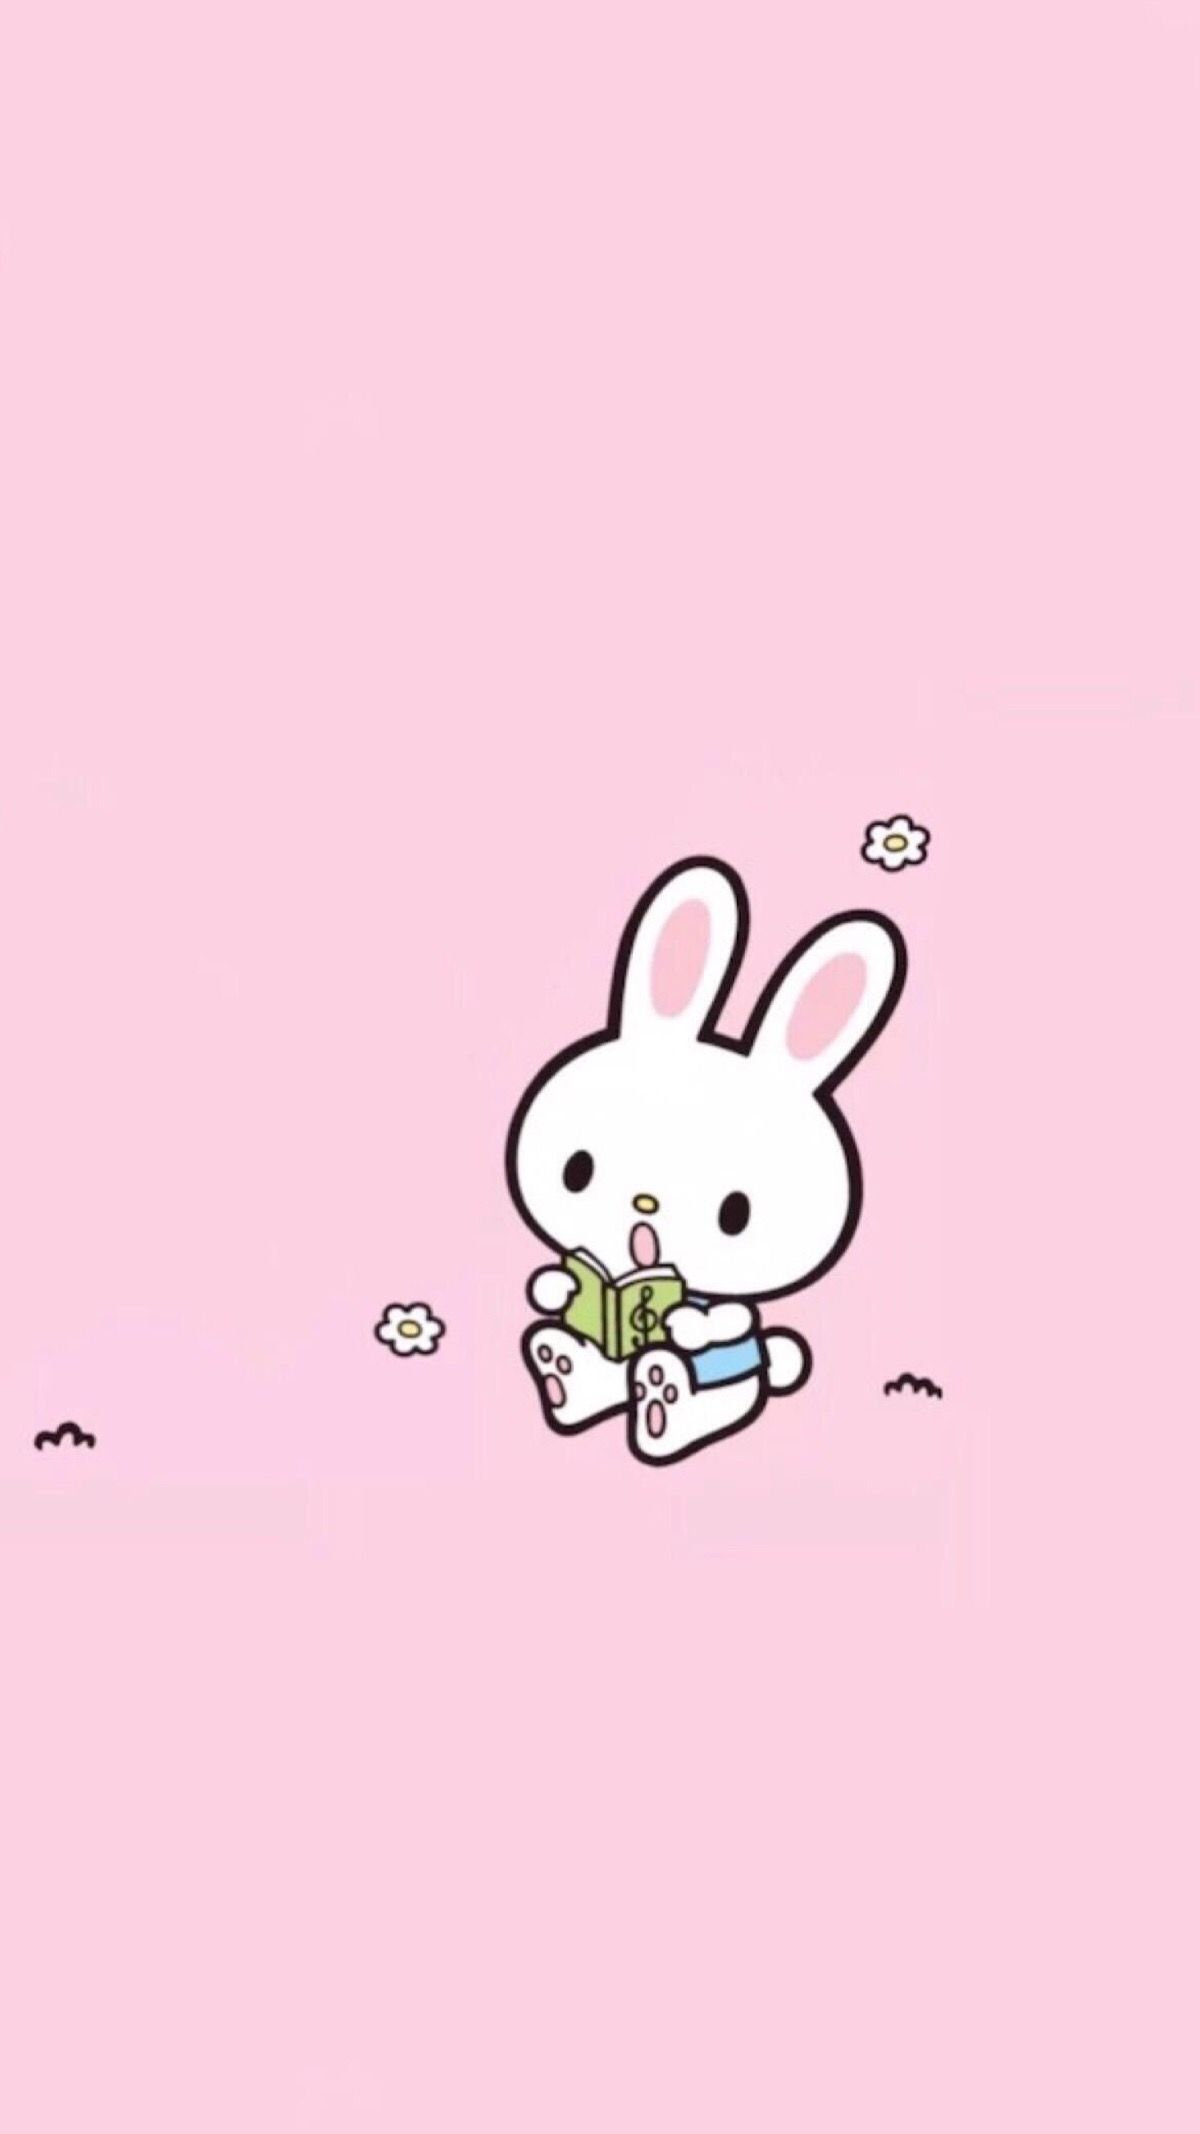 Cute Anime Rabbit Wallpapers - Wallpaper Cave